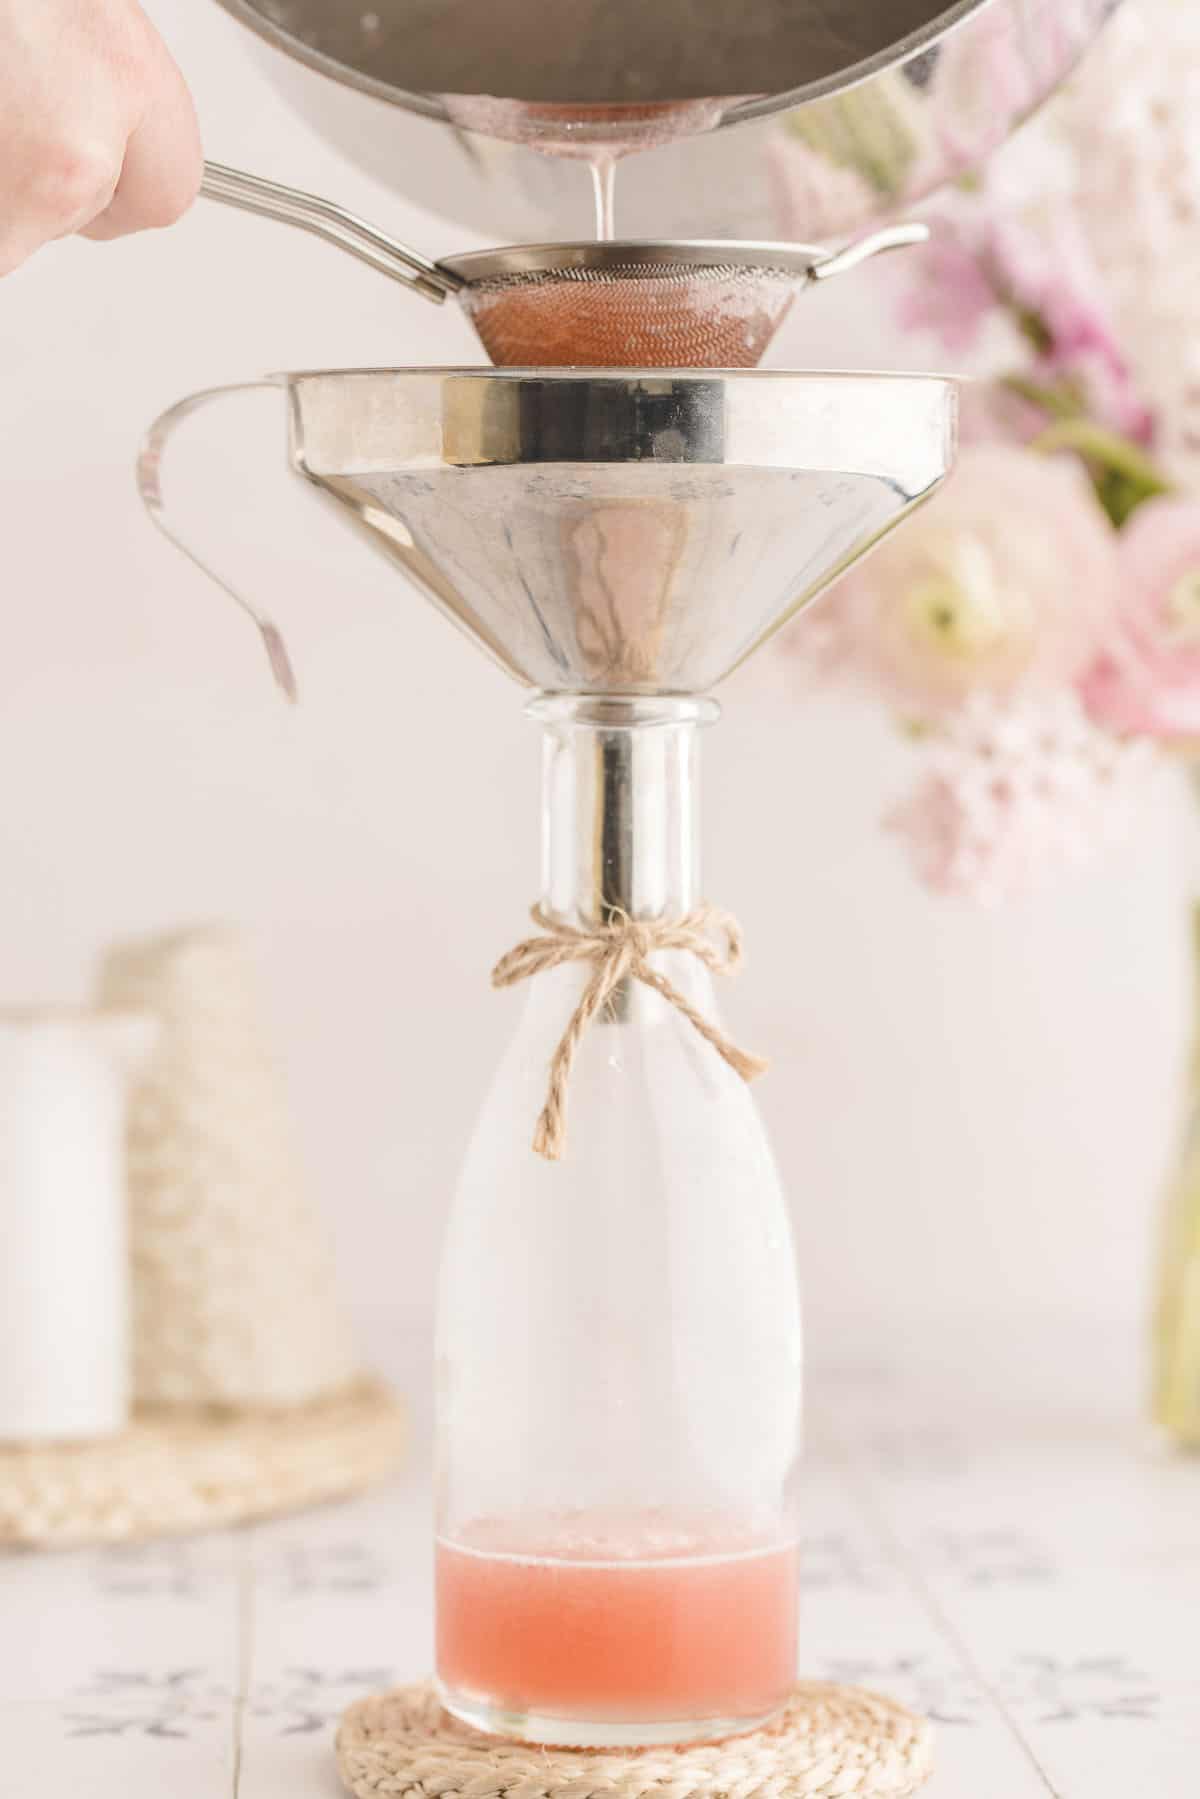 Pink rhubarb syrup pouring through a silver funnel into a bottle with a twine bow on it. Light and bright with a white background and light pink flowers in the background.